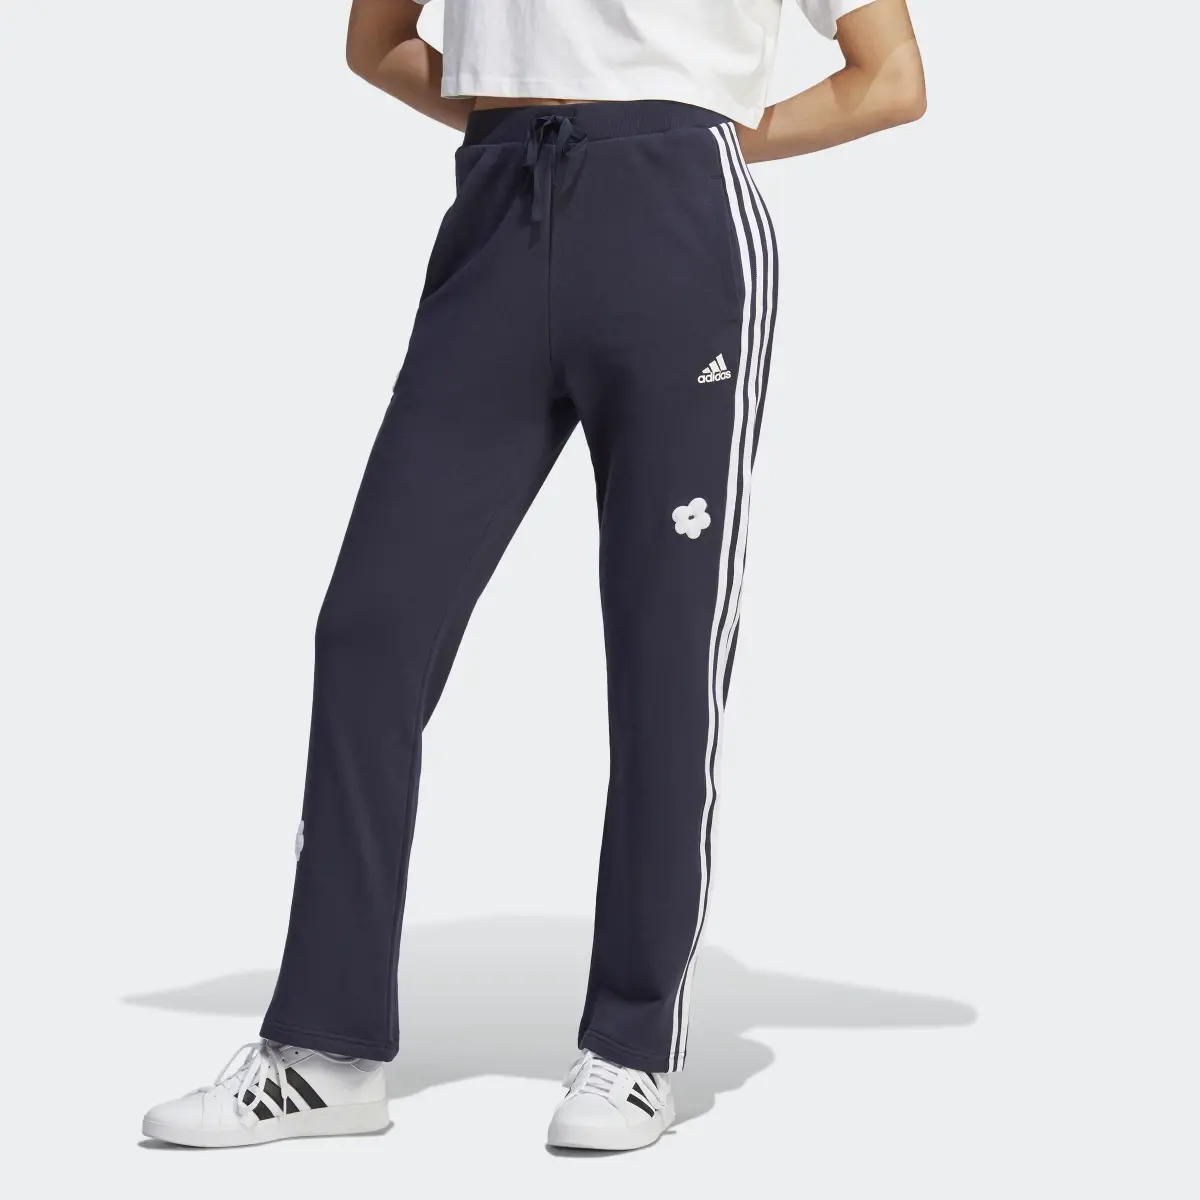 Adidas 3-Stripes High Rise Joggers with Chenille Flower Patches. 1